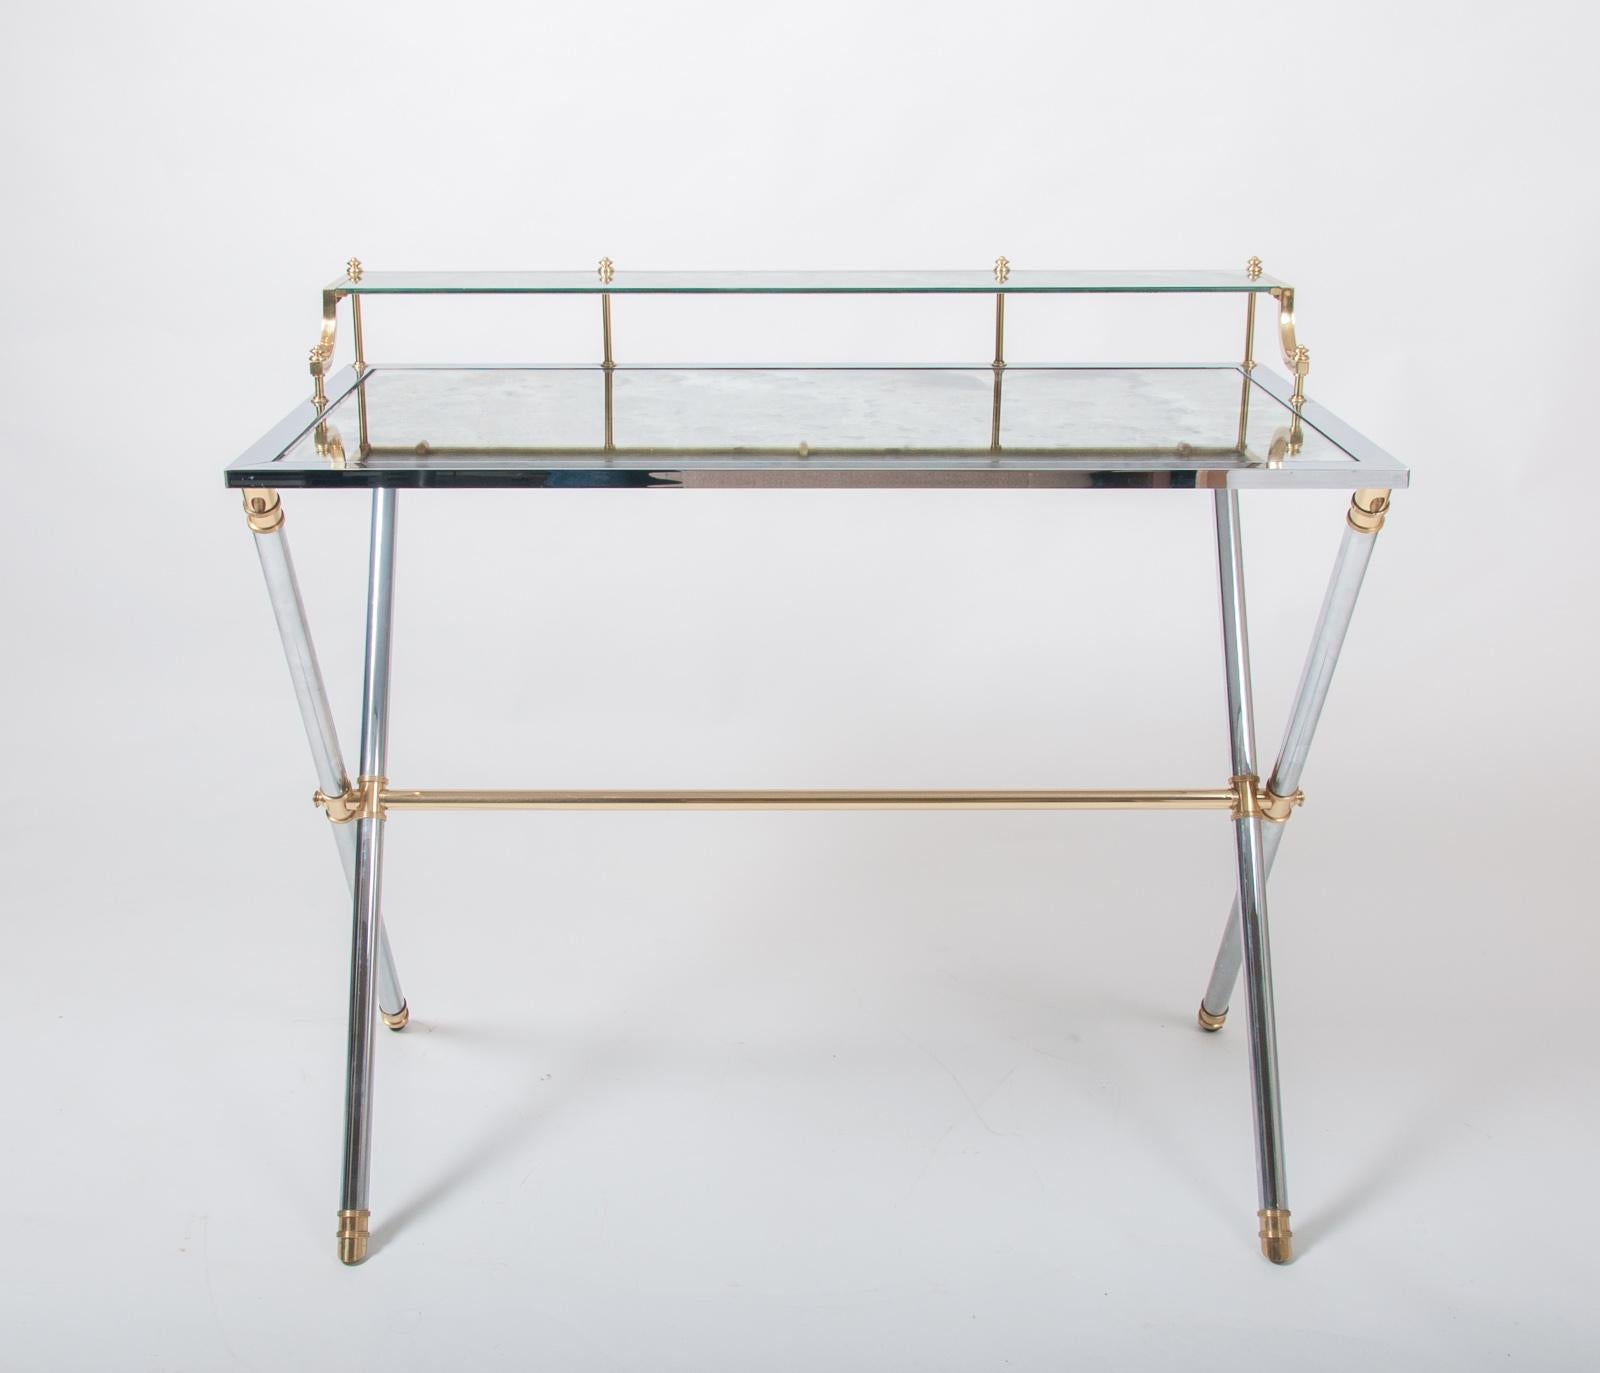 Maison Jansen brass and steel desk, silver and gold patina with a rectangular mirrored top resting on a cylindrical X-frame base connected by a stretcher. Stamped “Jansen, 9 Rue Royale” France circa 1970

 

Maison Jansen was a Paris-based